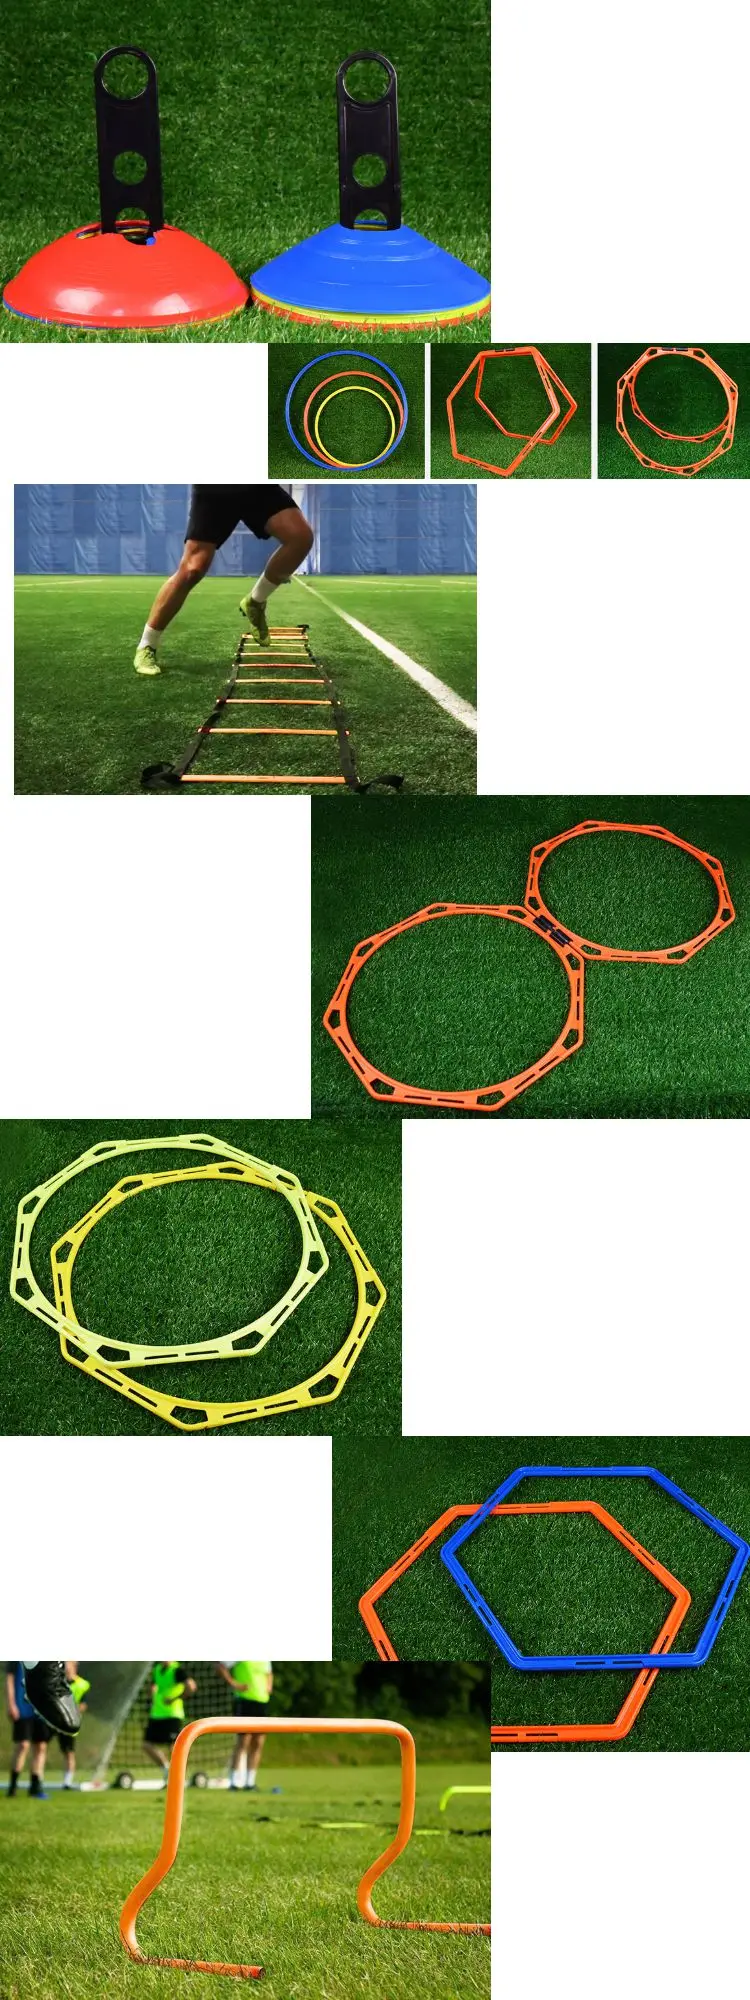 Details about   CW Goal Football Kit Excersice & Fitness Equipment Set Hurdle Disc Cone Ladder 